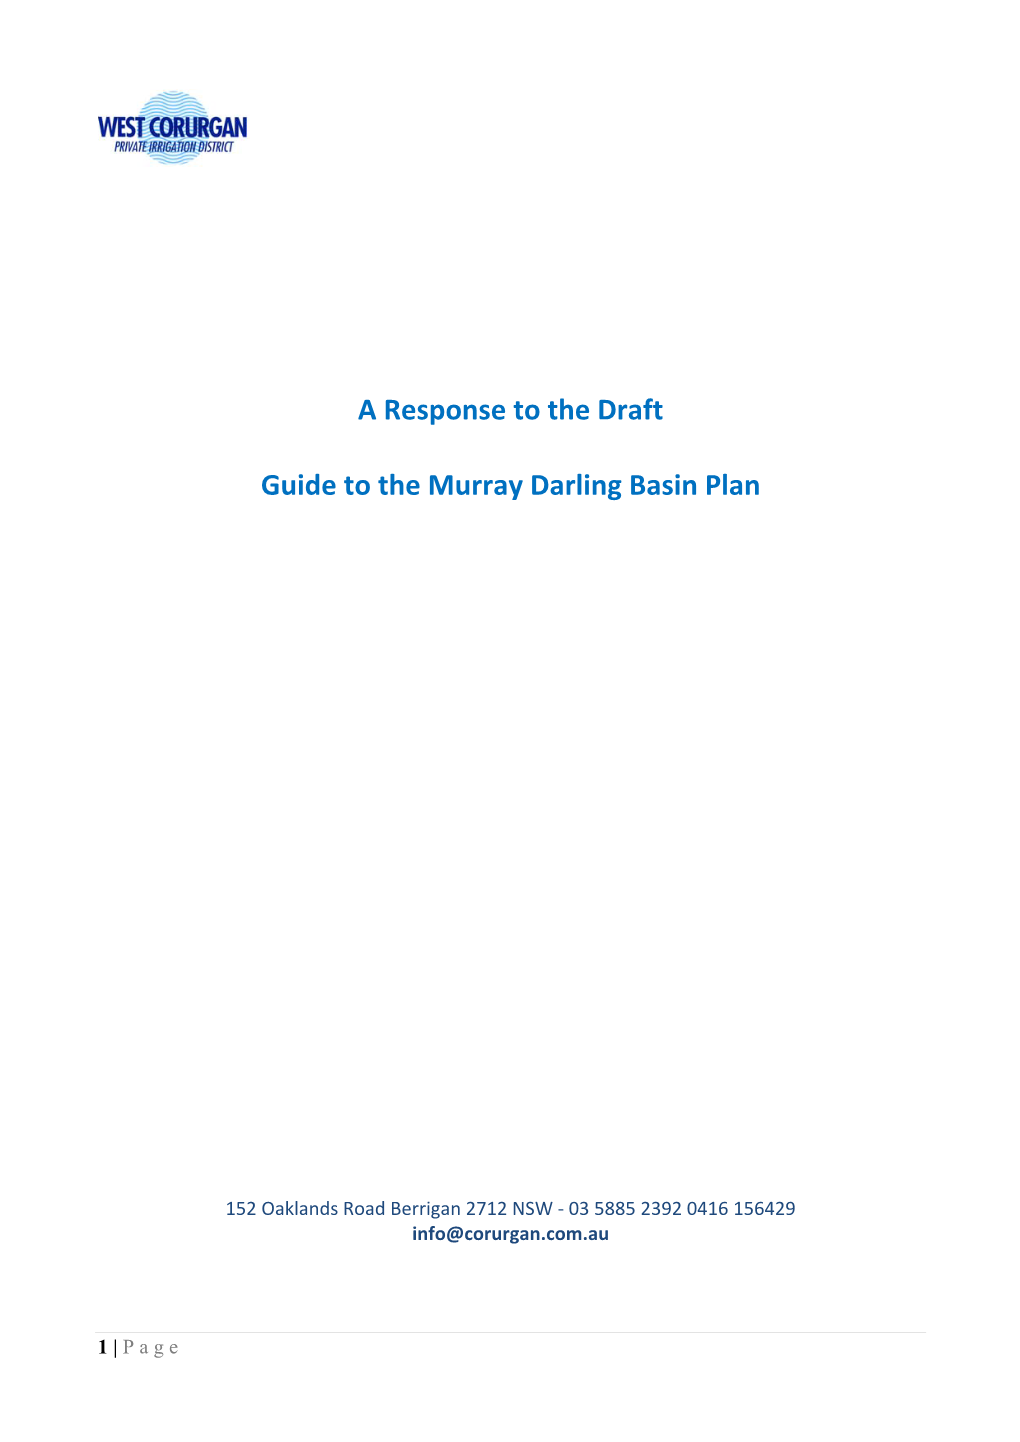 A Response to the Draft Guide to the Murray Darling Basin Plan